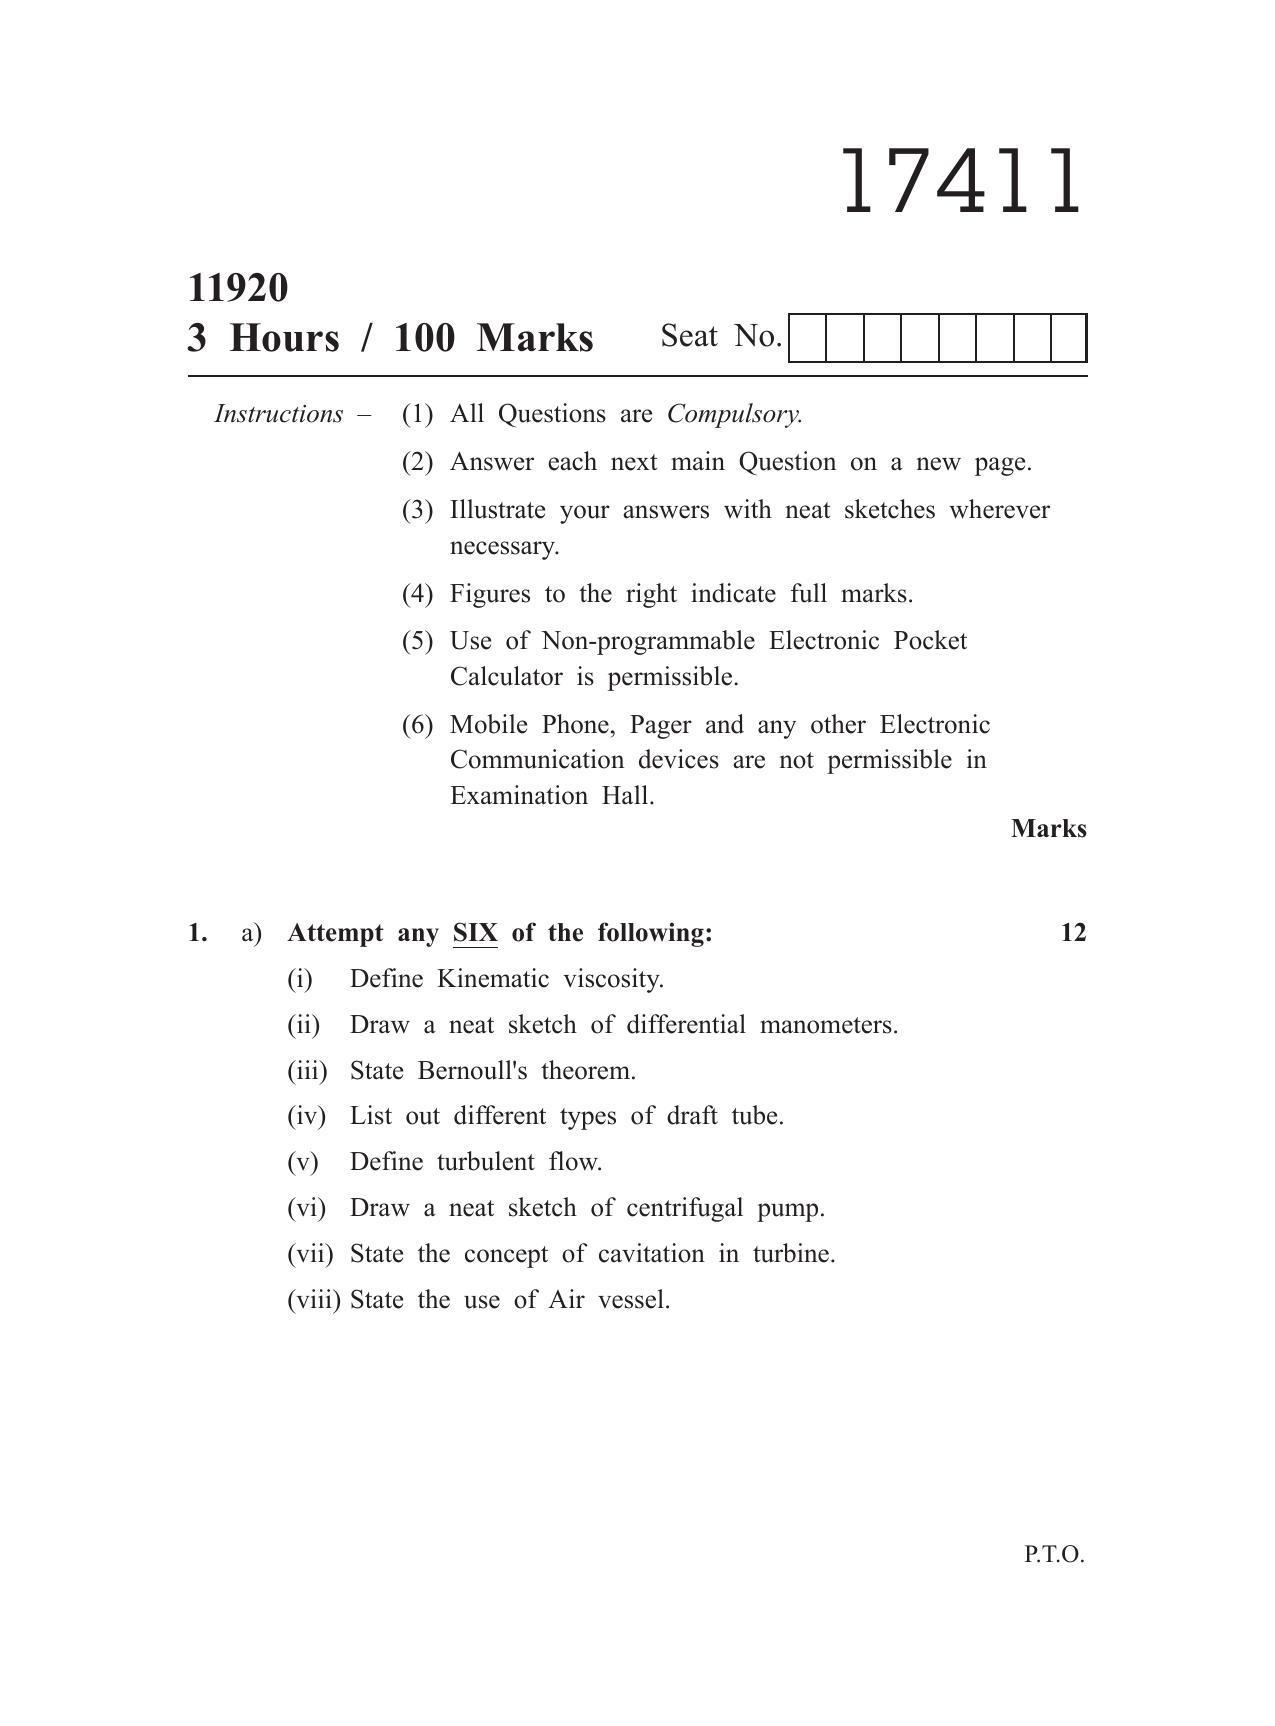 MSBTE Winter Question Paper 2019 - Fluid Mechanics and Machinery - Page 1